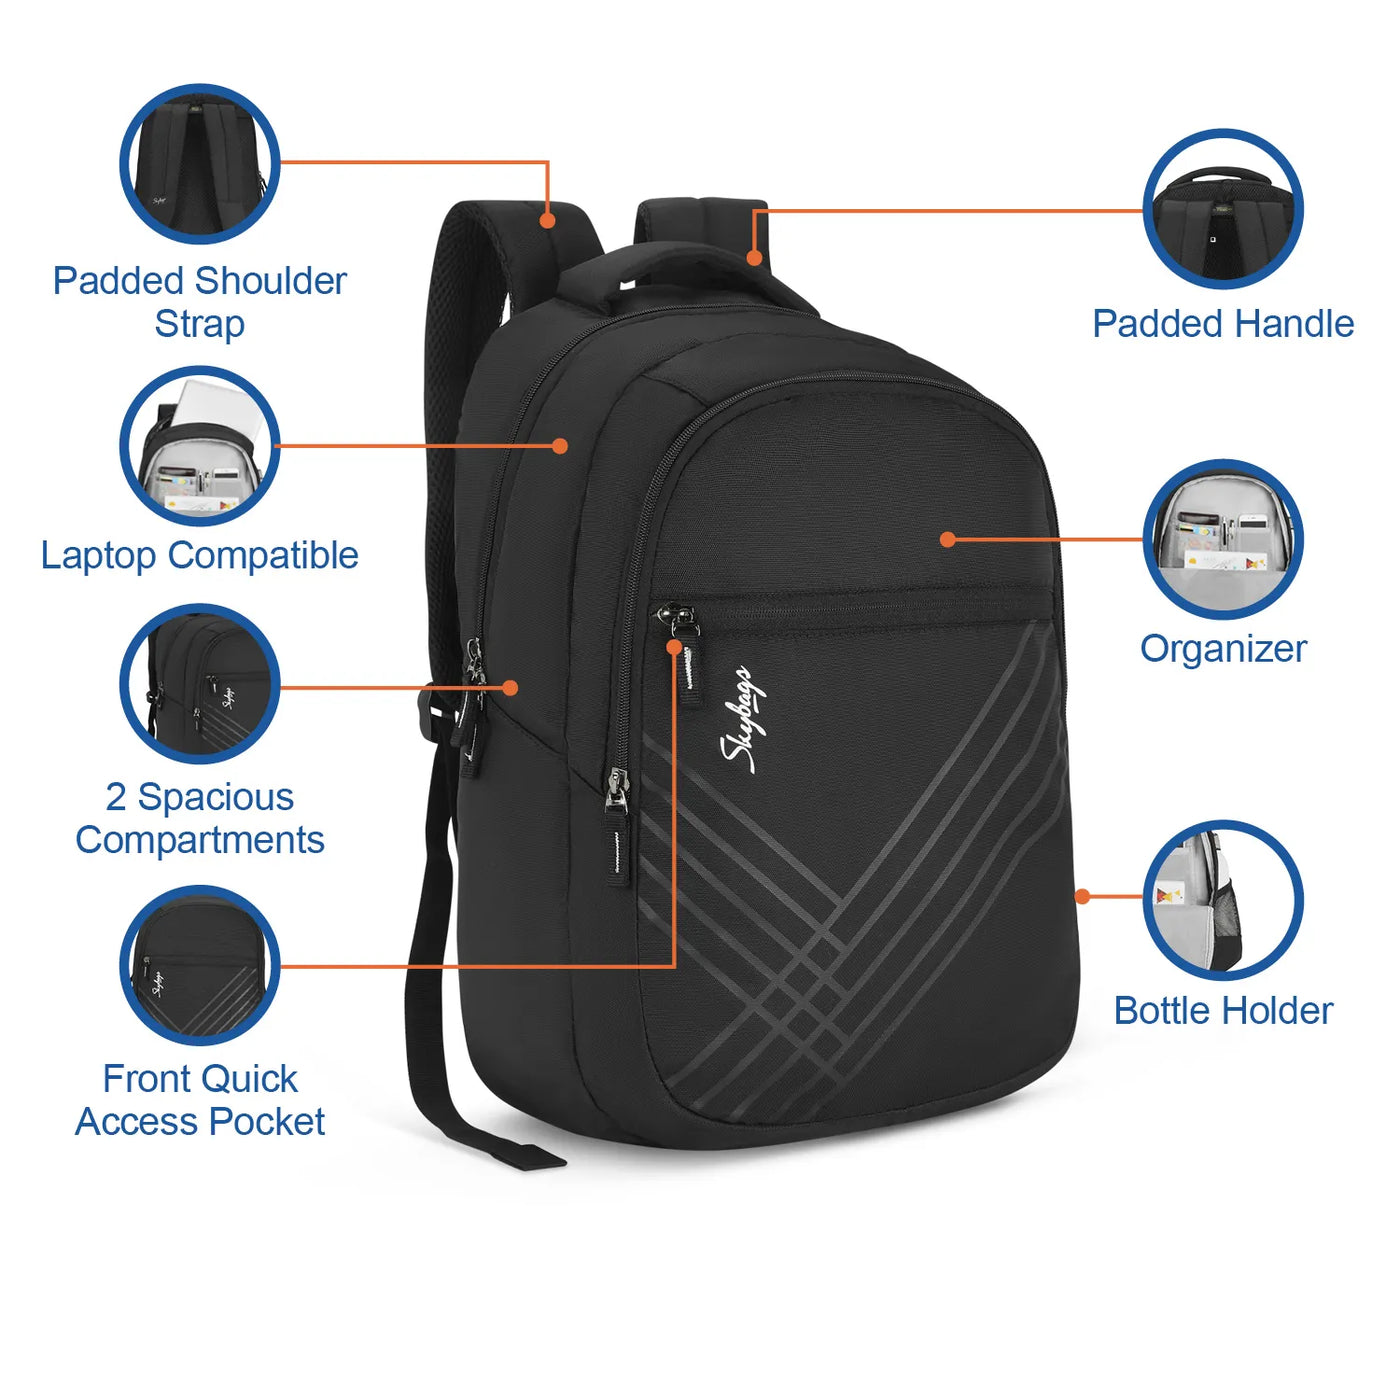 SKYBAGS CHESTER "NEW LAPTOP BACKPACK BLACK"